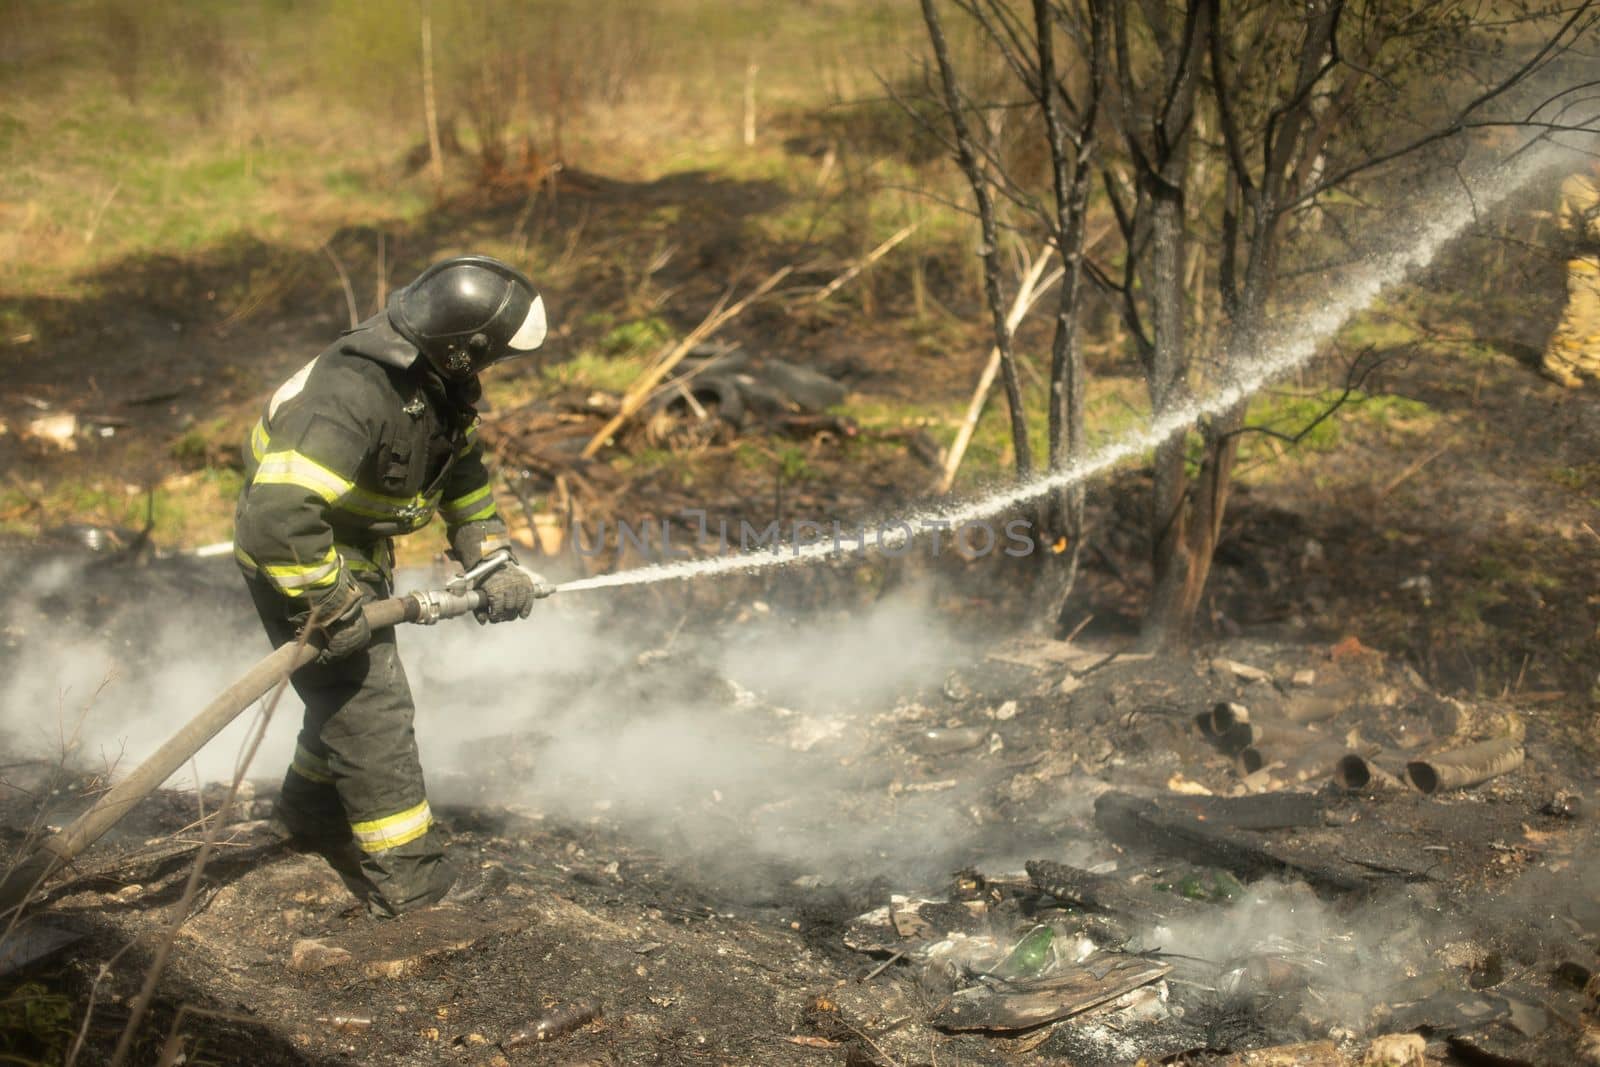 Firefighter puts out fire in woods. Lifeguard pours water. by OlegKopyov